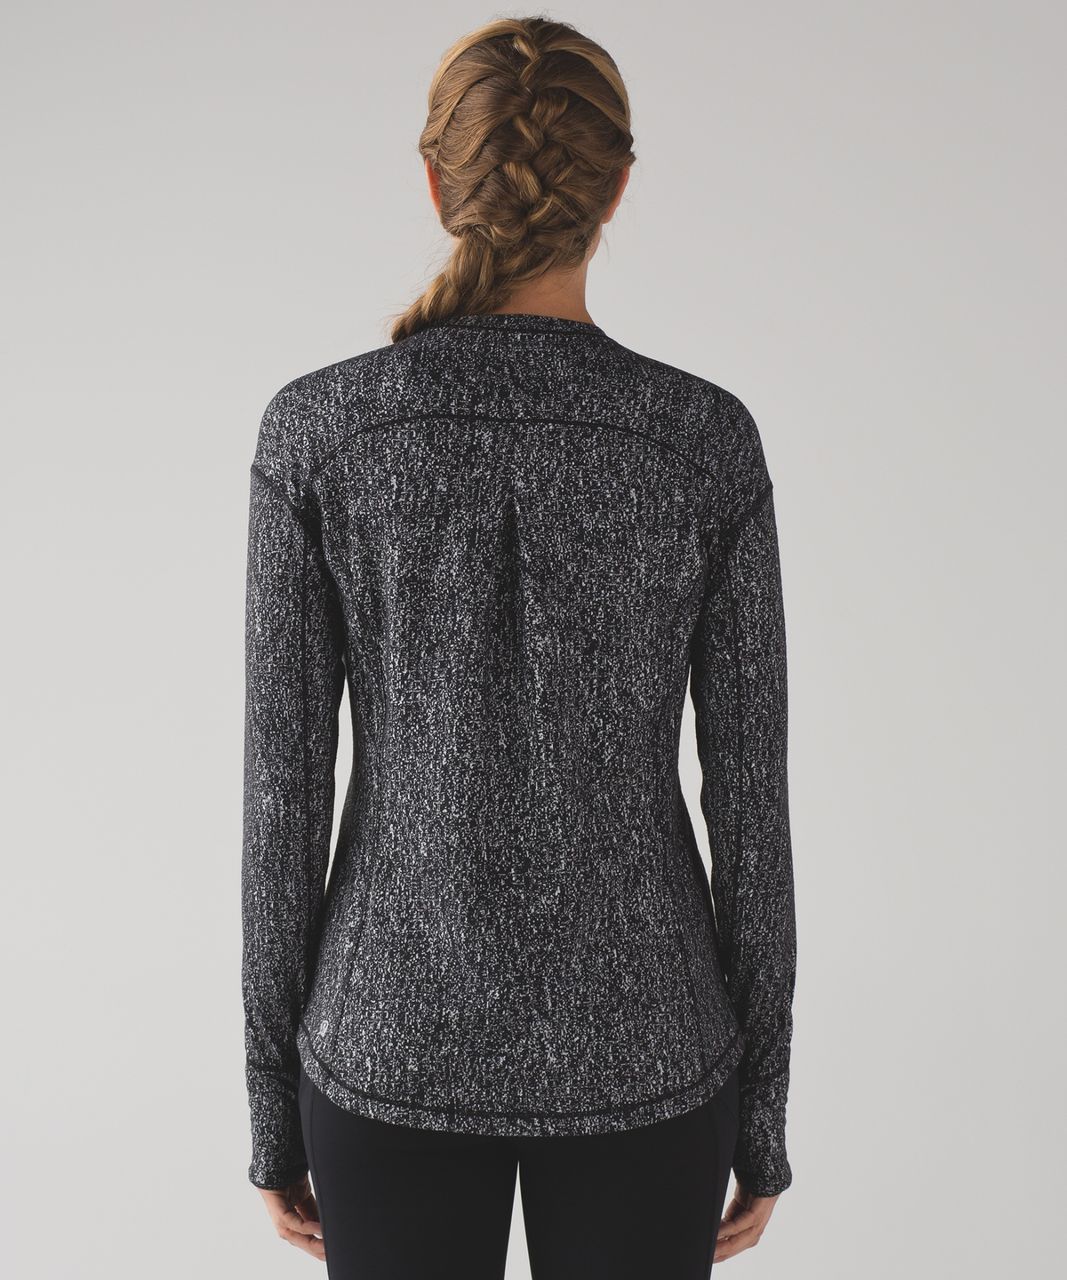 Lululemon Outrun Long Sleeve - Suited Print White Black